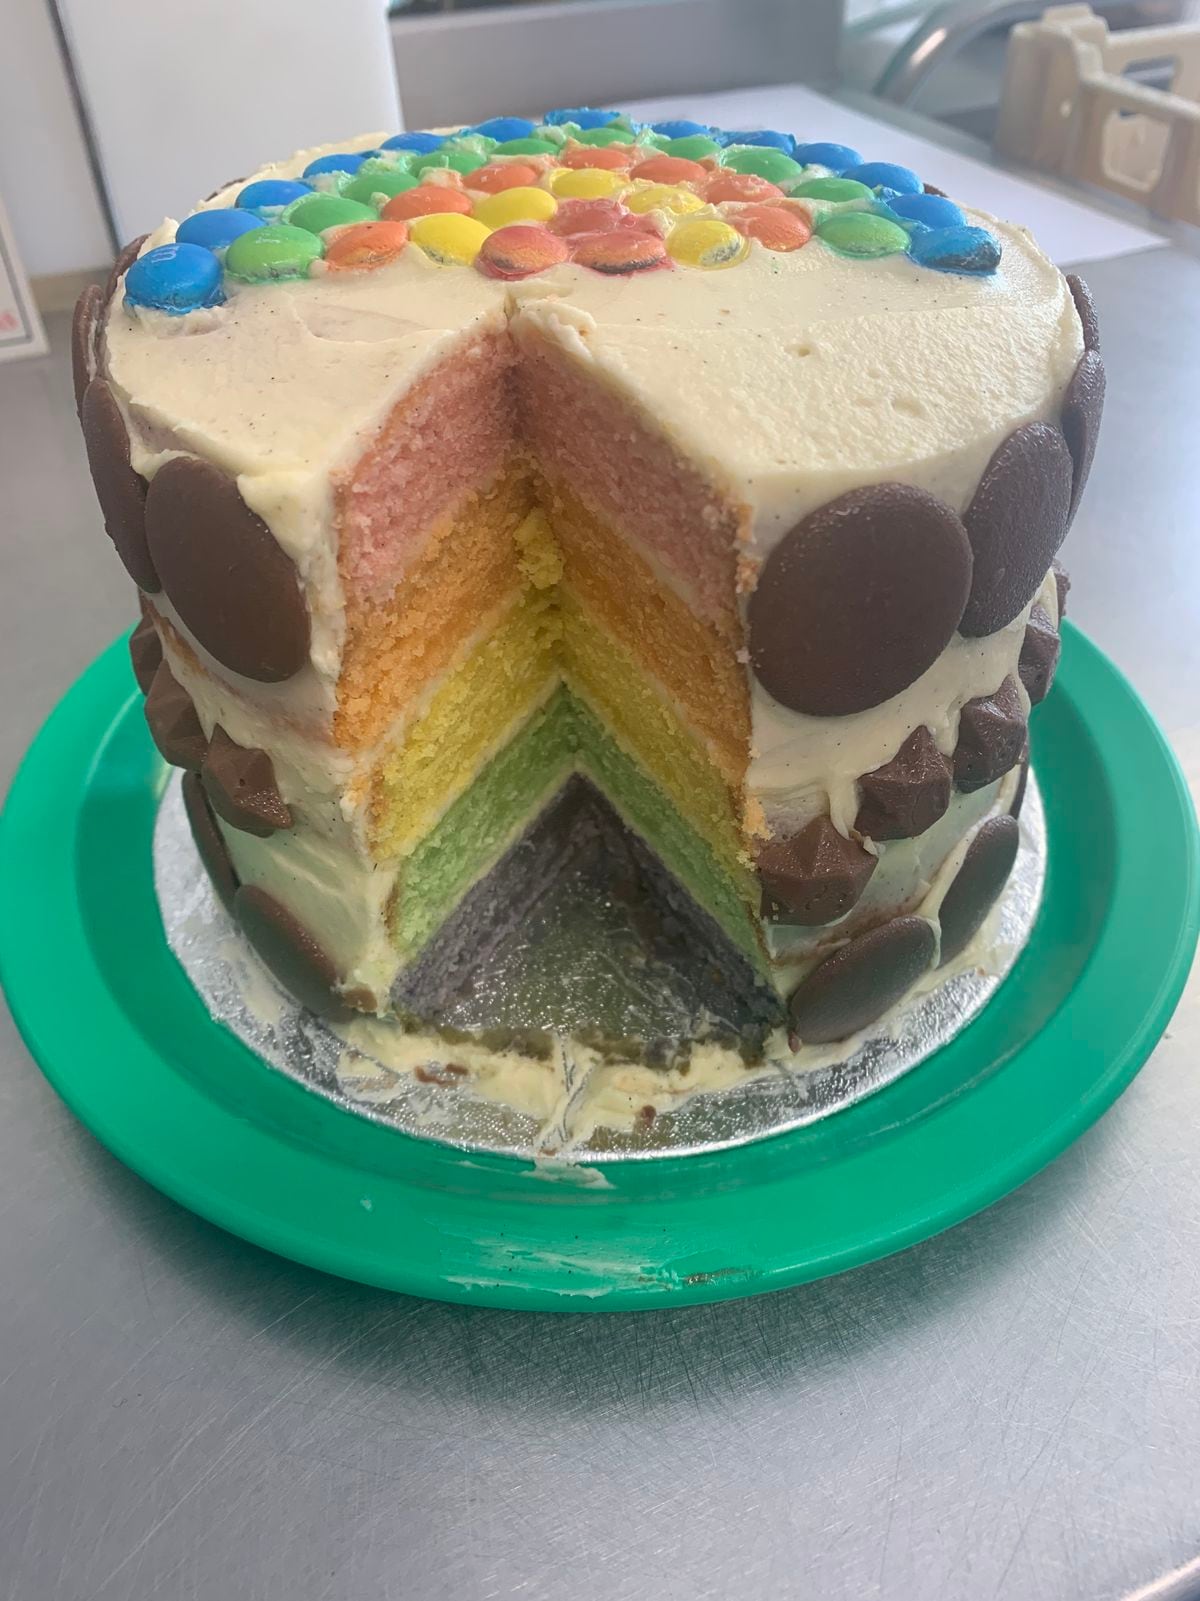 Finchfield Nursery worker Anne Myers created this rainbow cake to reward staff working caring for children of key workers